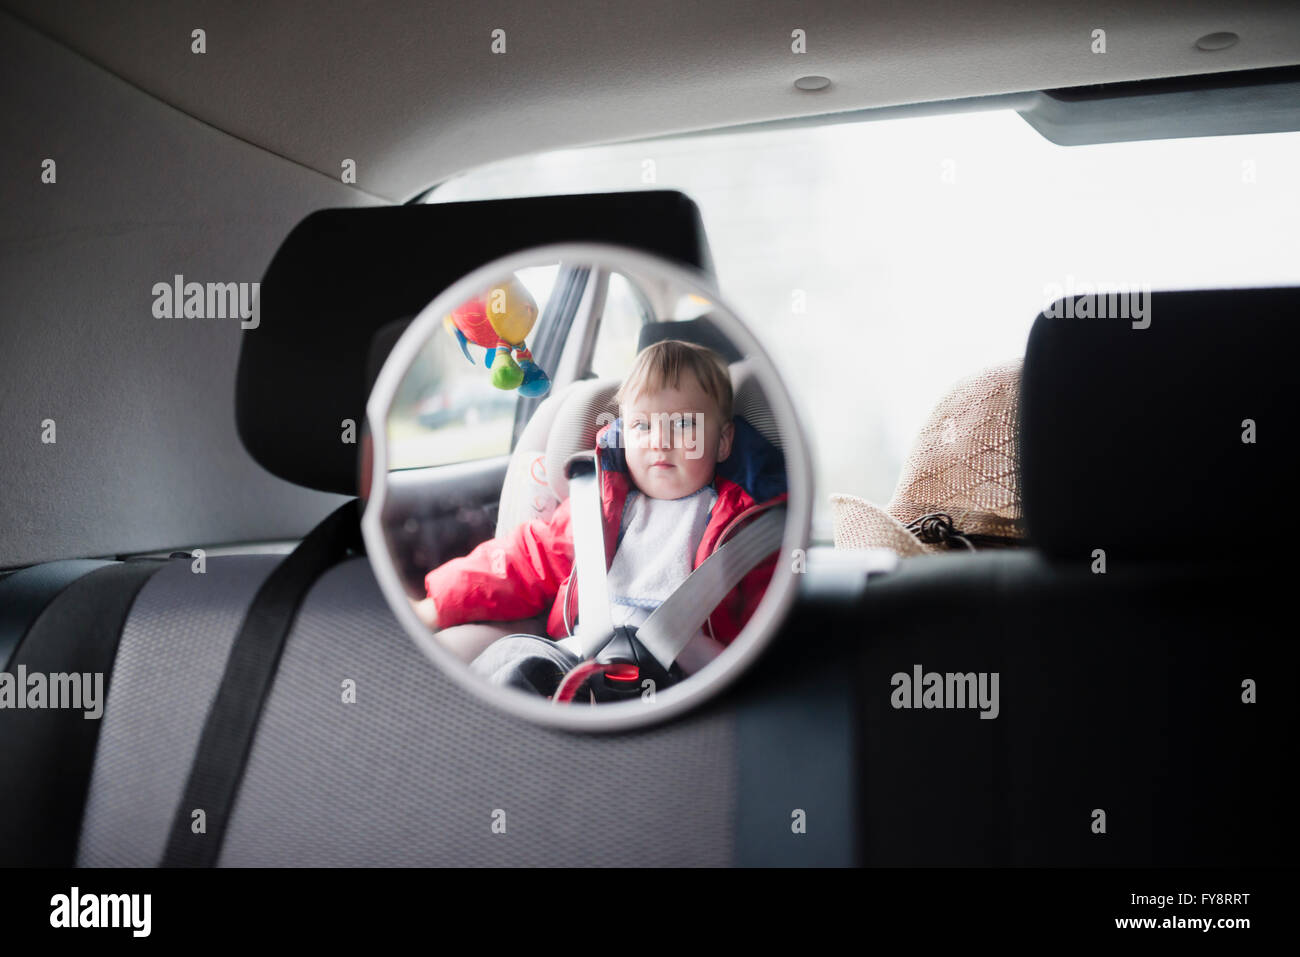 Mirror reflection of toddler sitting in child's seat in a car Stock Photo